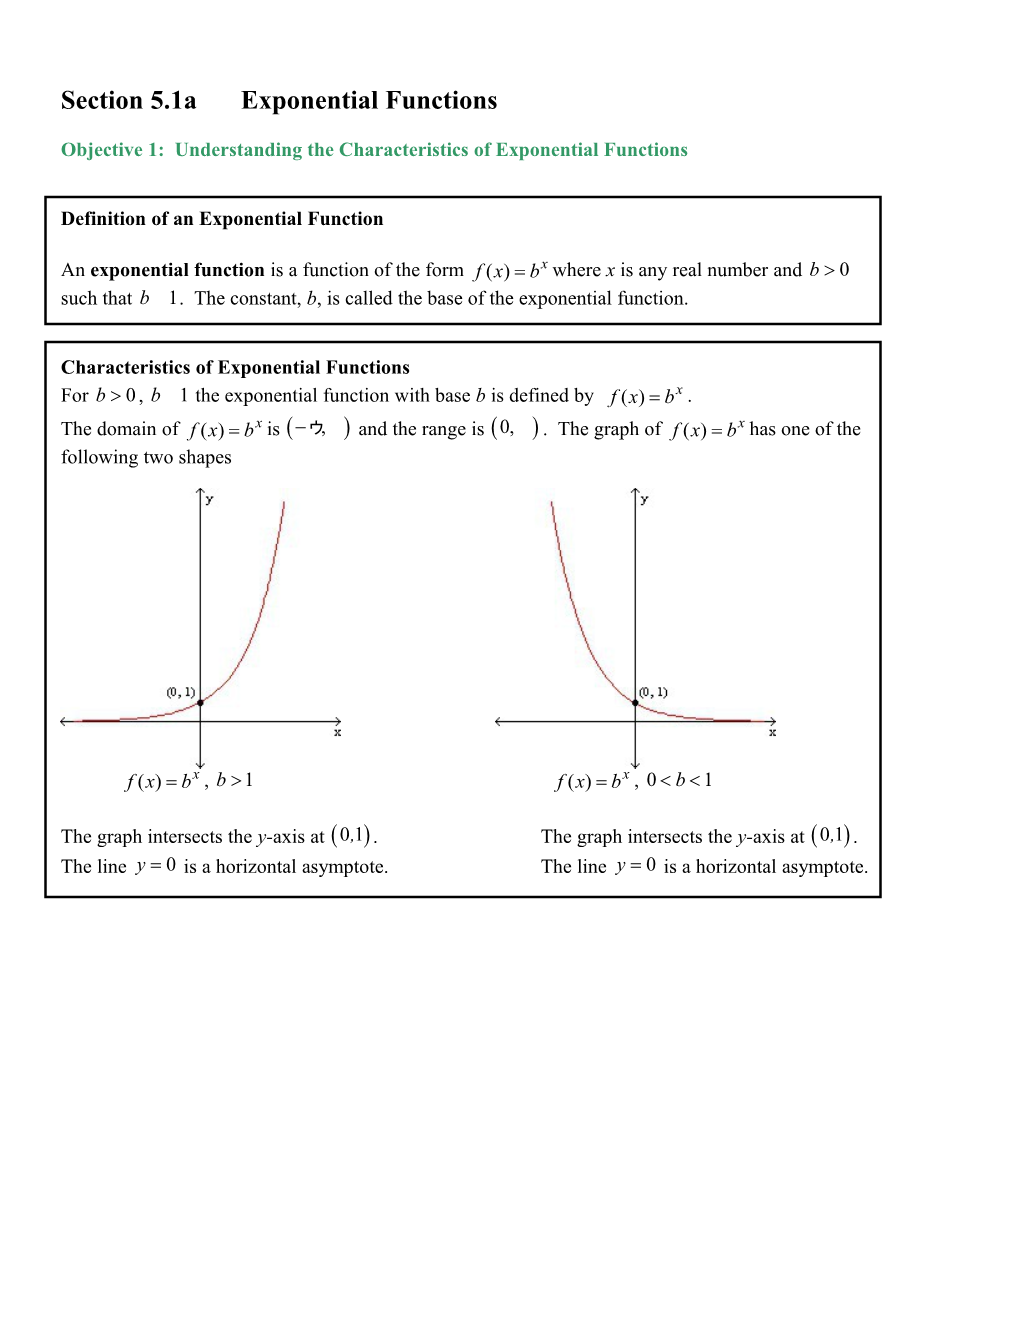 Objective 1: Understanding the Characteristics of Exponential Functions